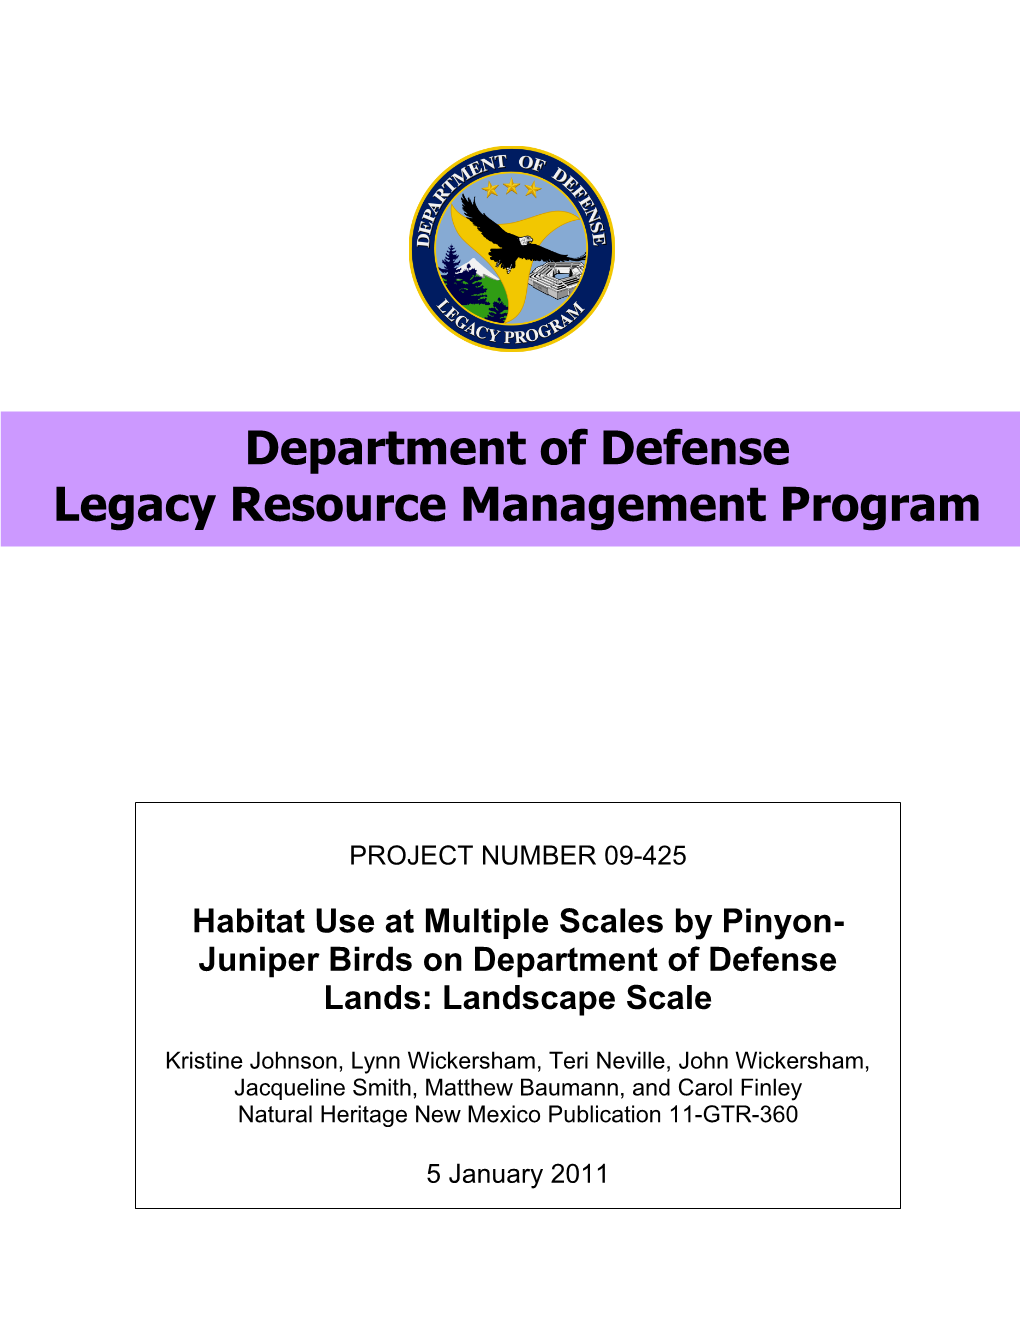 Management of Pinyon Pine Forests